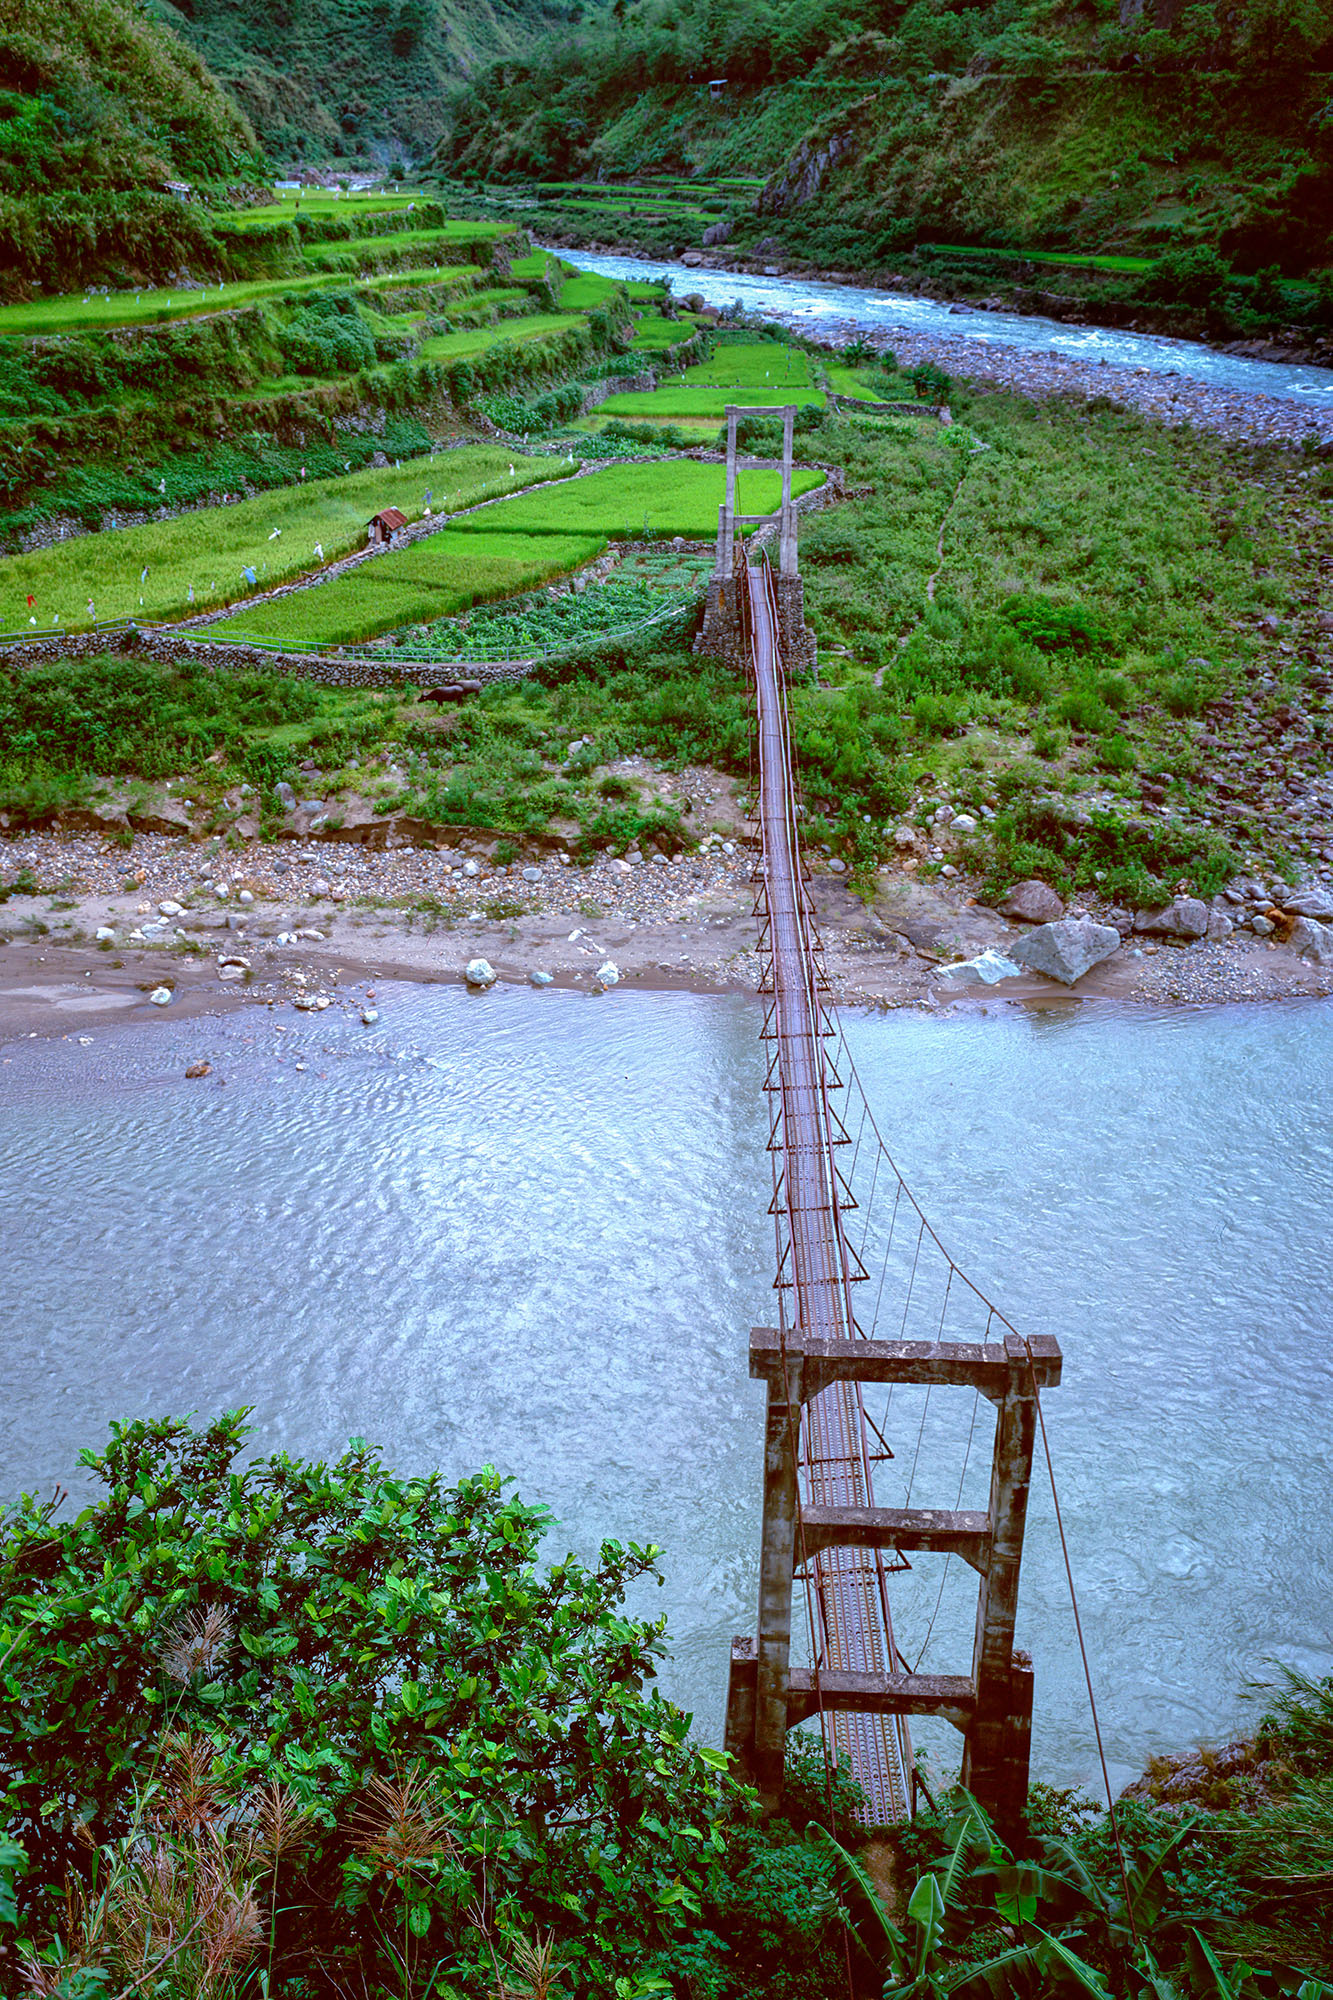 Taken with a Mamiya 7 camera on Velvia 50 film, this vertical shot captures the essence of the Banaue Rice Terraces. A long footbridge...